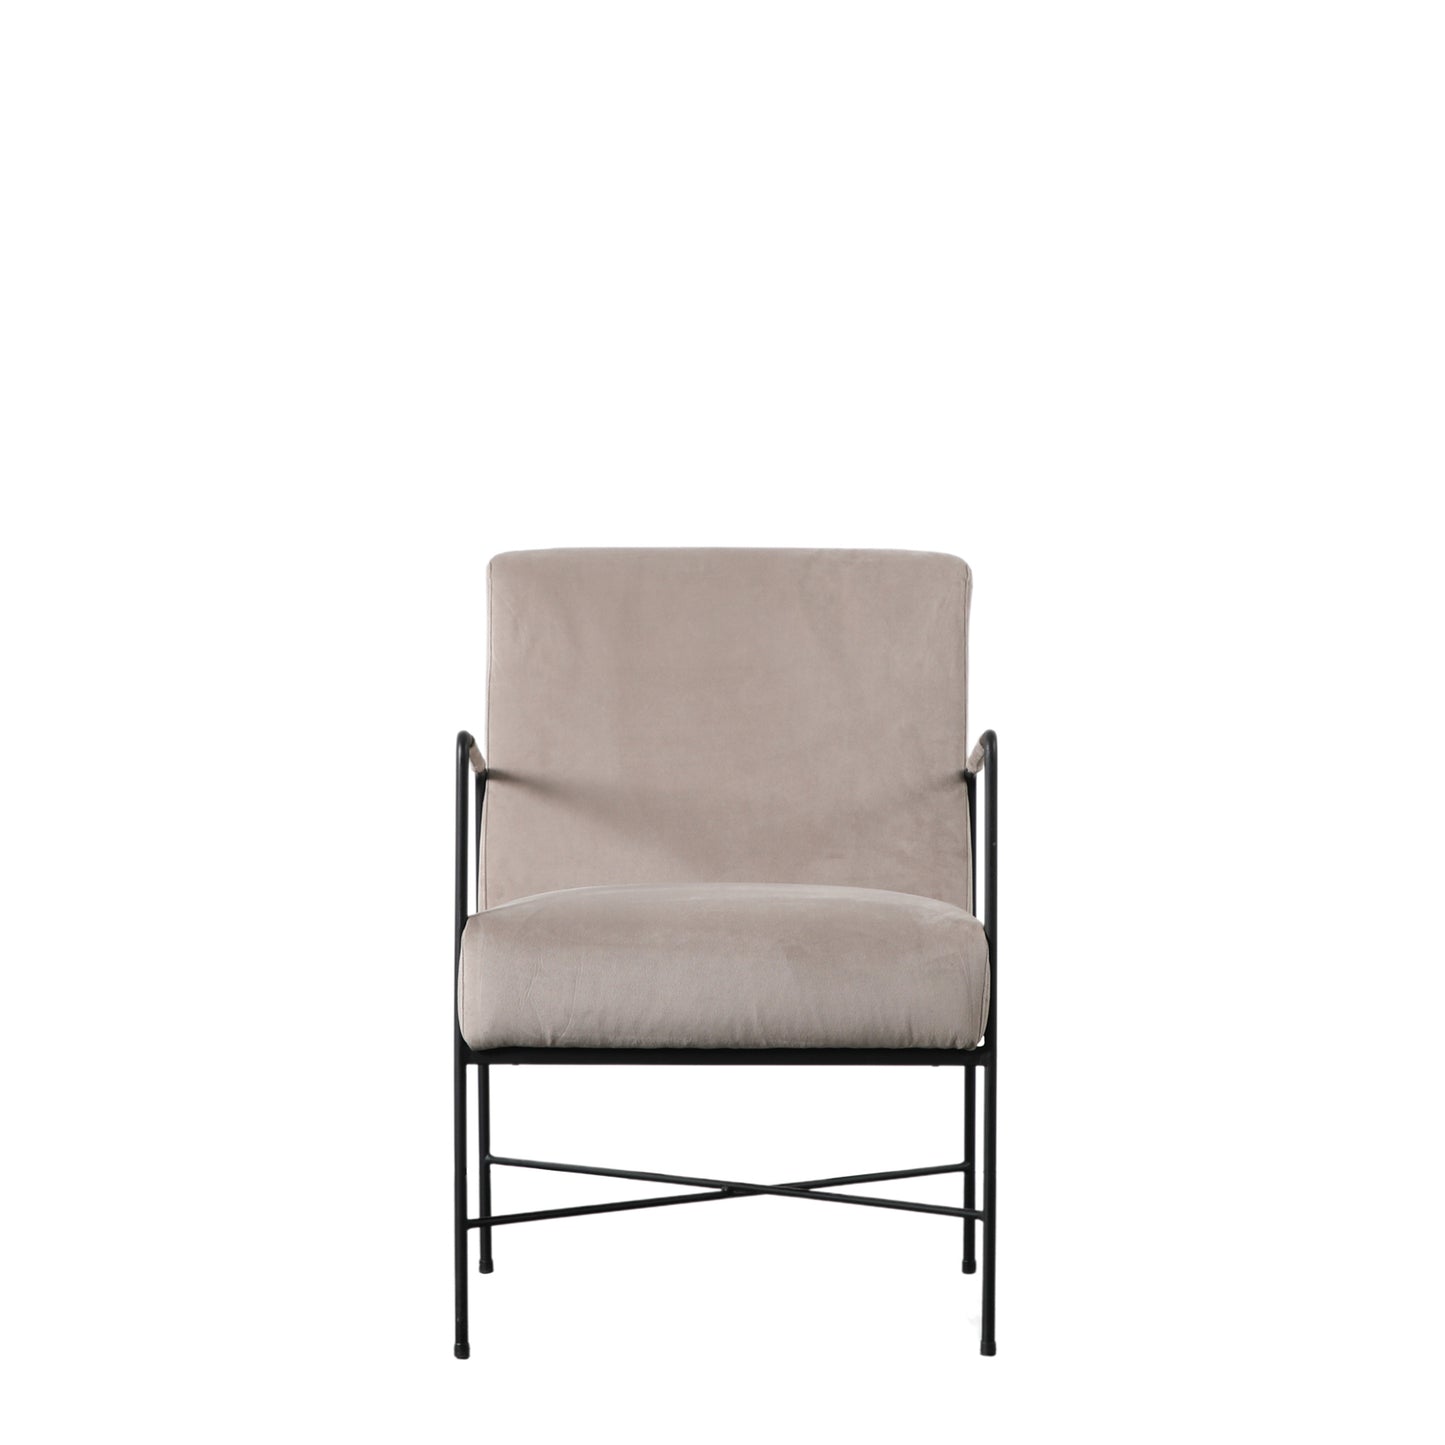 A Frogmore Armchair Grey with a beige upholstered seat and a black frame for home furniture or interior decor.